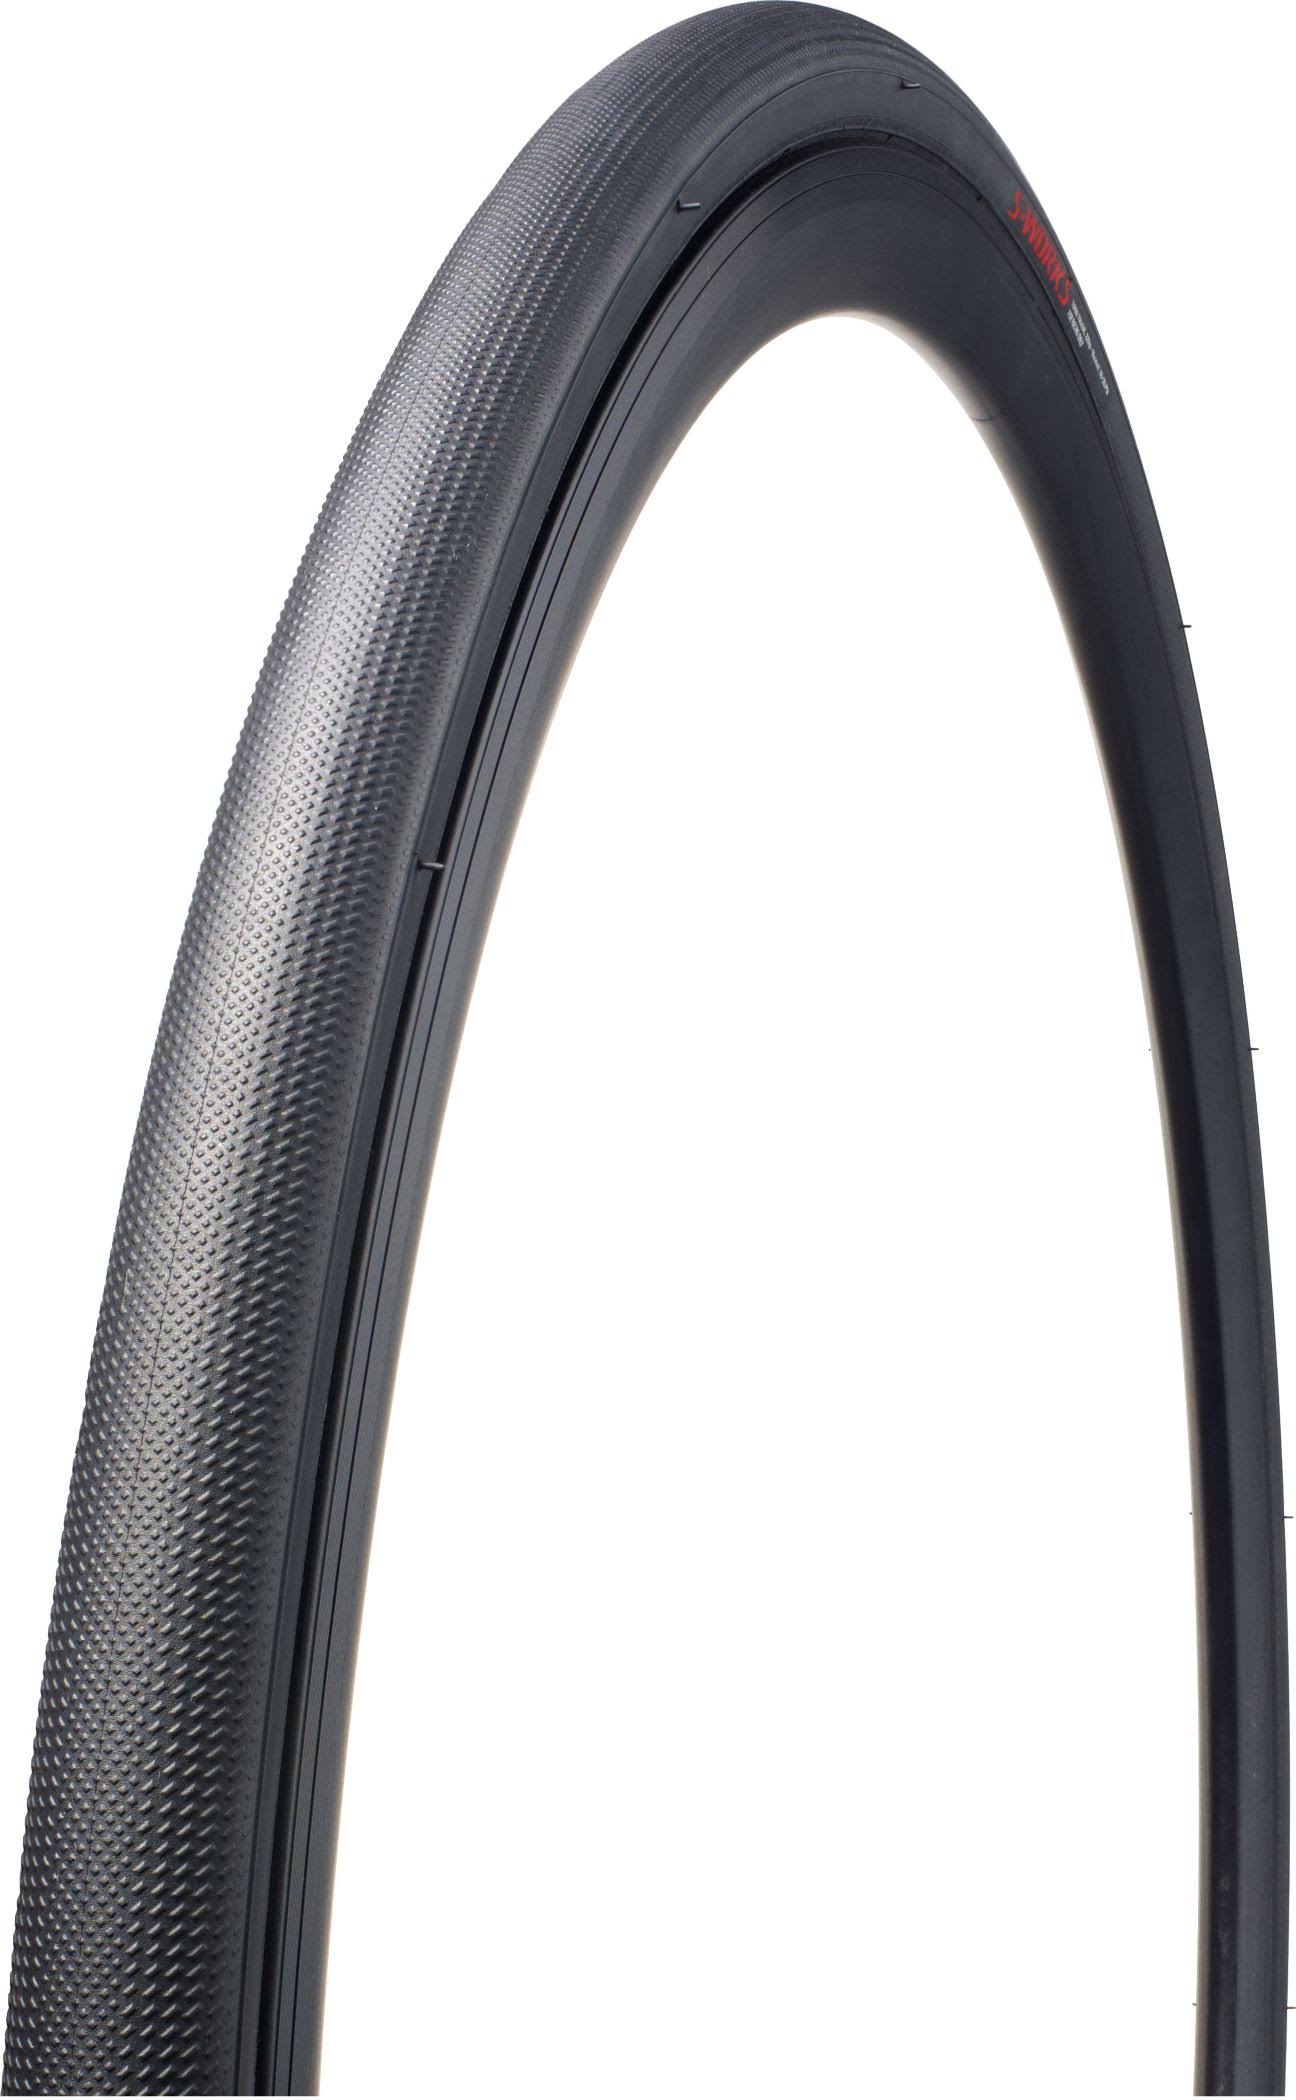 Specialized S Works Turbo Tubeless Tires - 700C x 24C